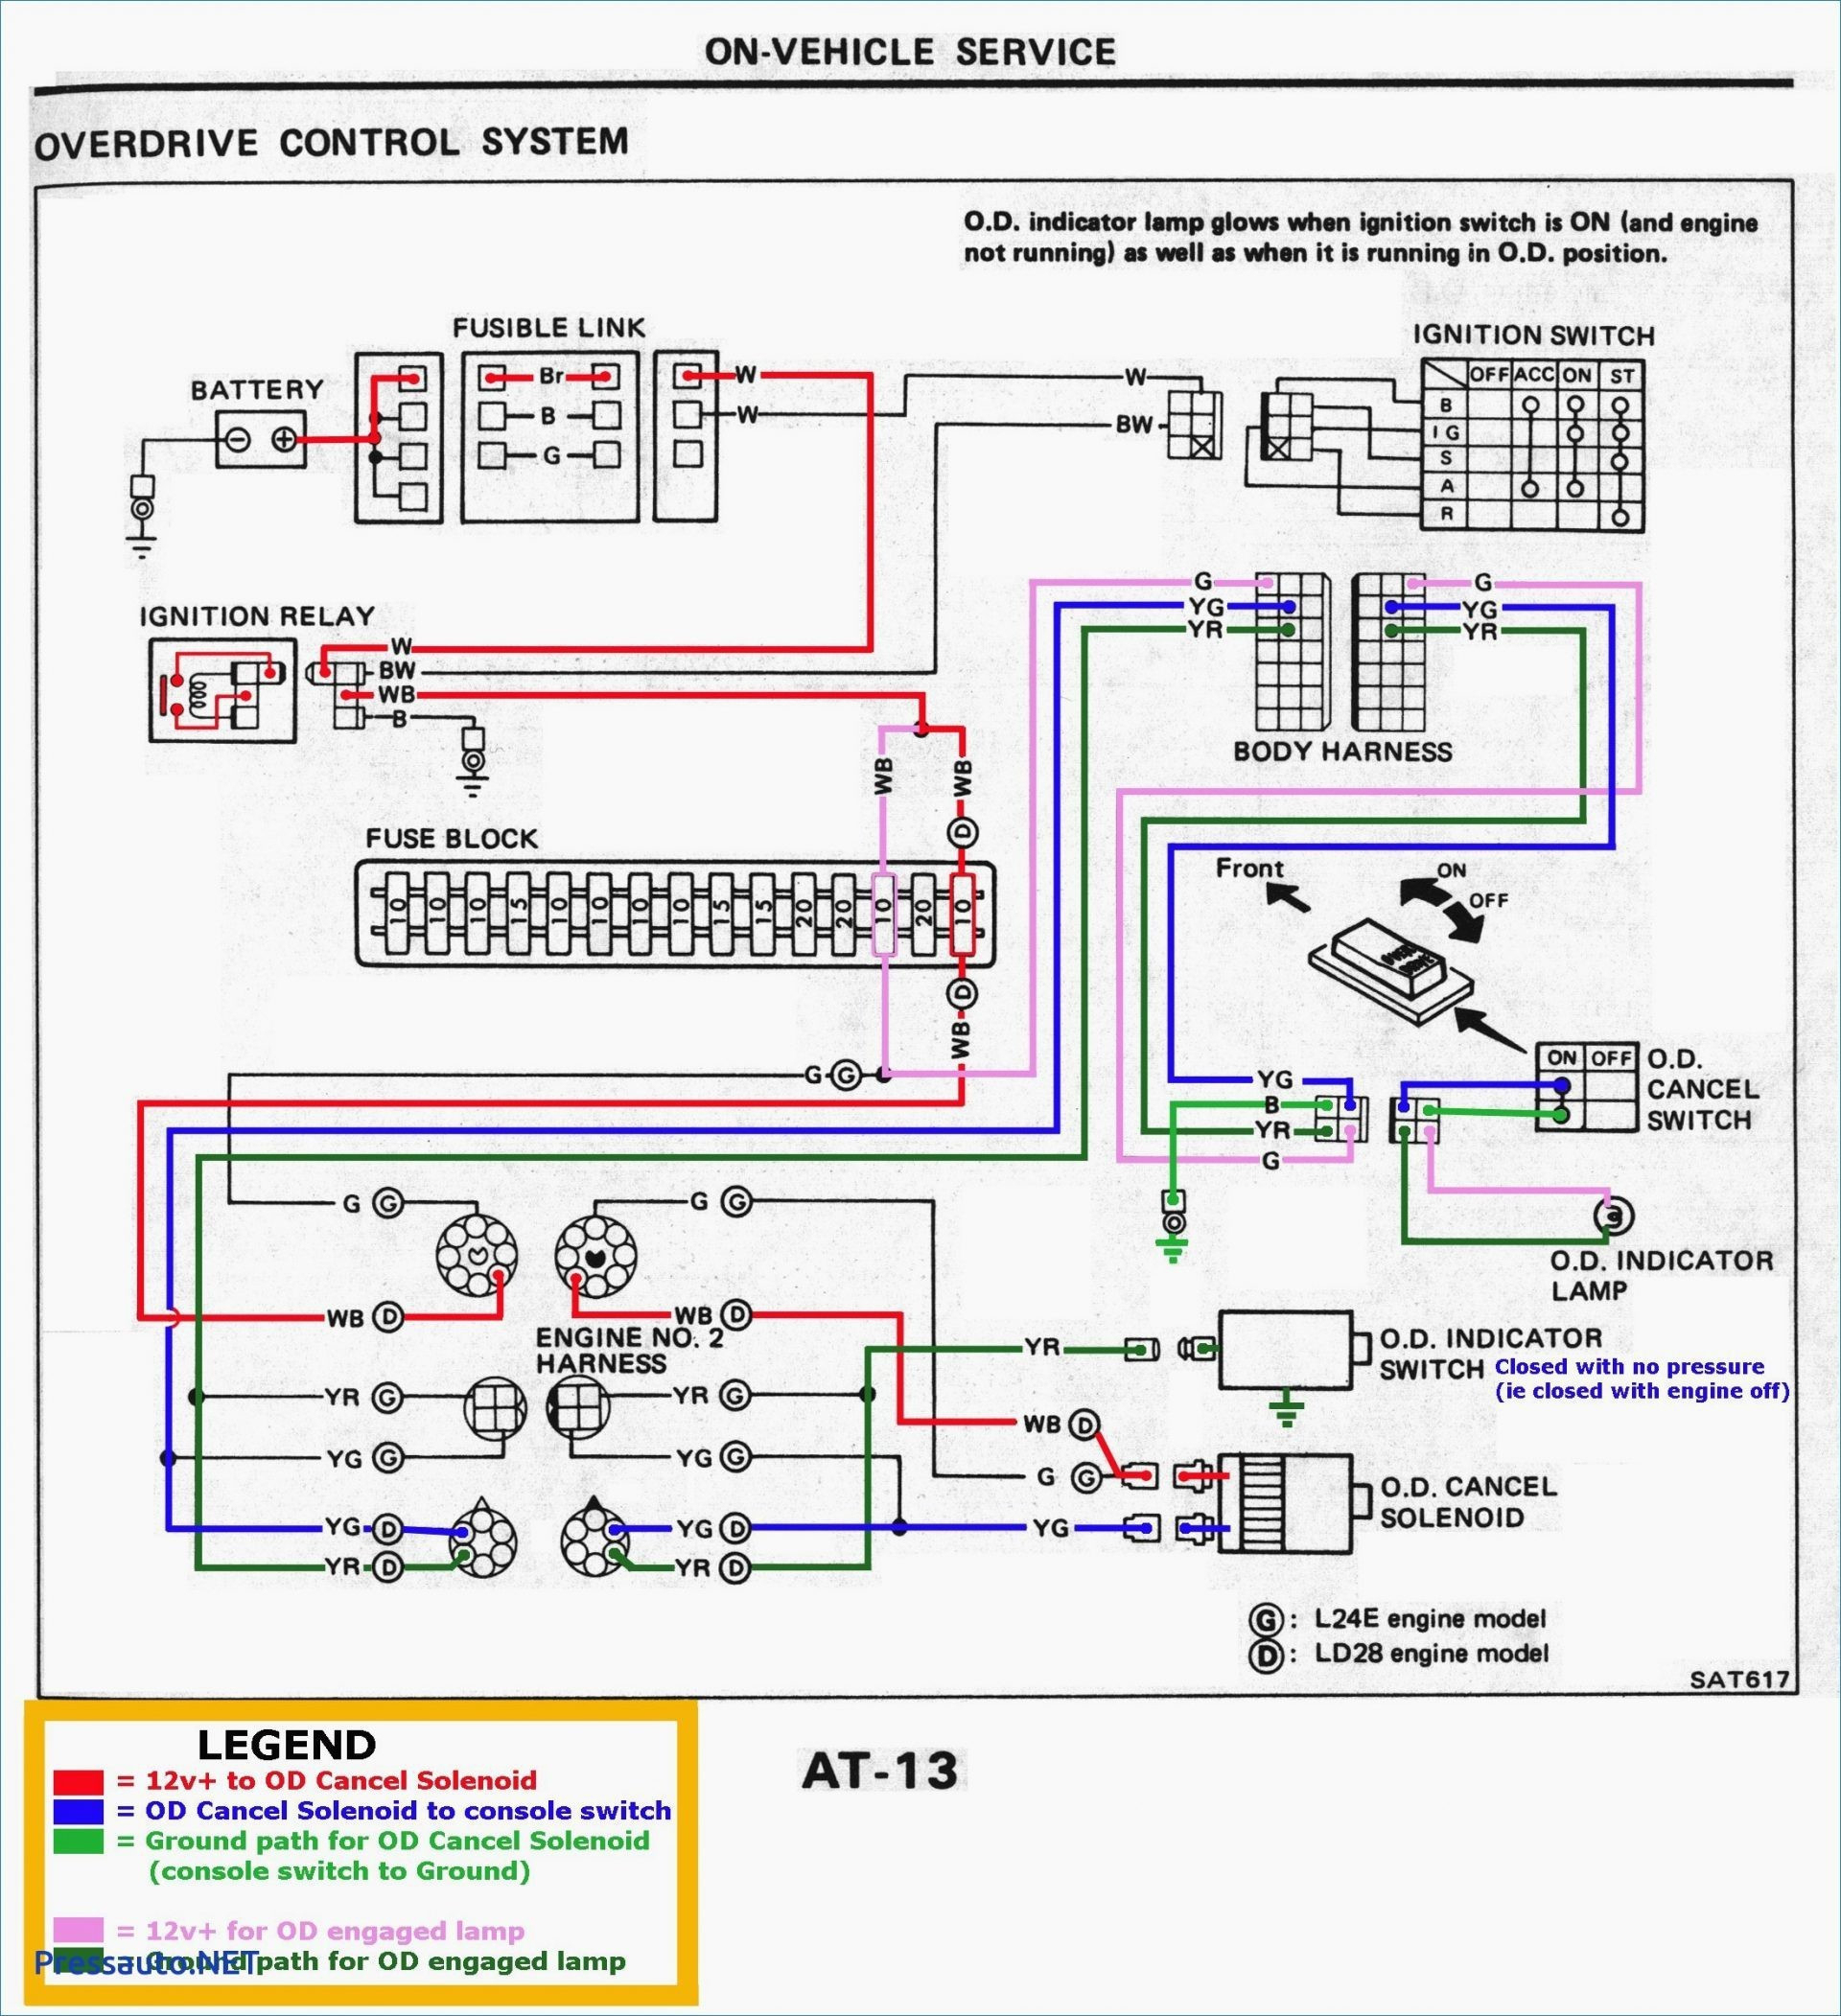 Collection Of Automotive Wiring Diagram Color Codes Download - Wiring Diagram Color Codes